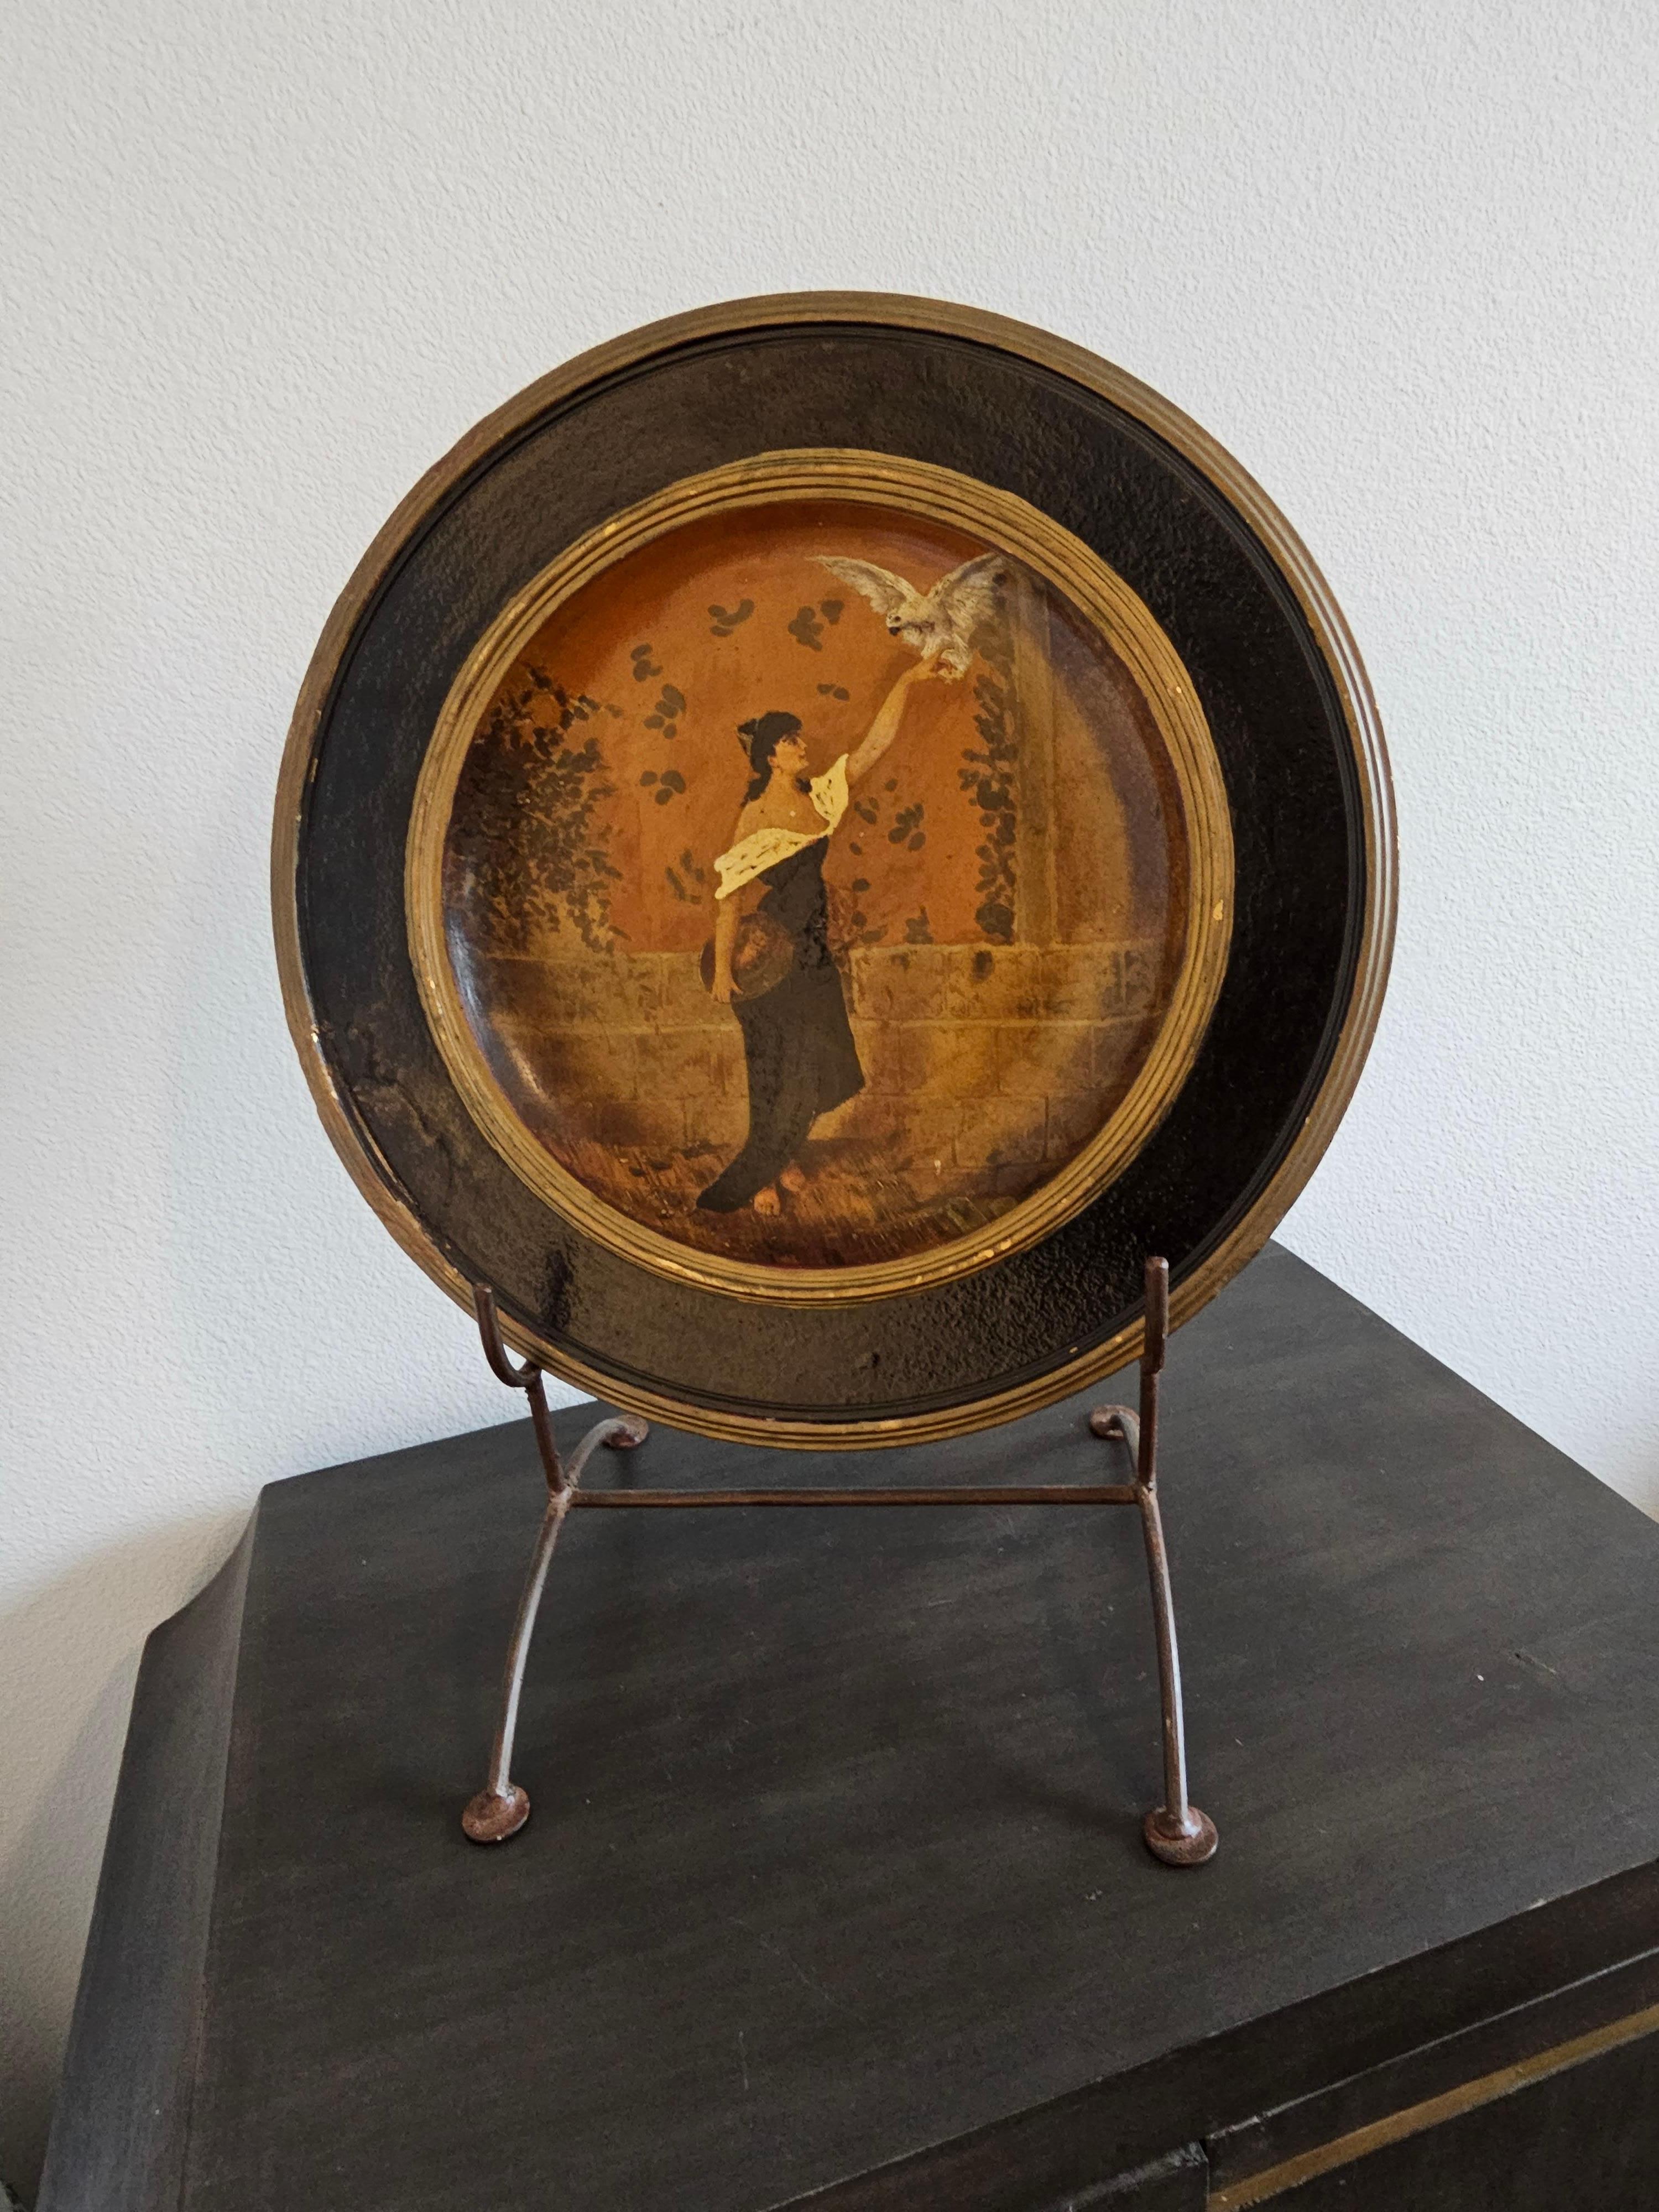 A beautiful hand-crafted and hand-painted terra-cotta charger wall plaque, Germany, early 20th century, featuring an exceptional painted scene with woman and bird in courtyard, signed with maker's mark at circular foot back (illegible), intact with